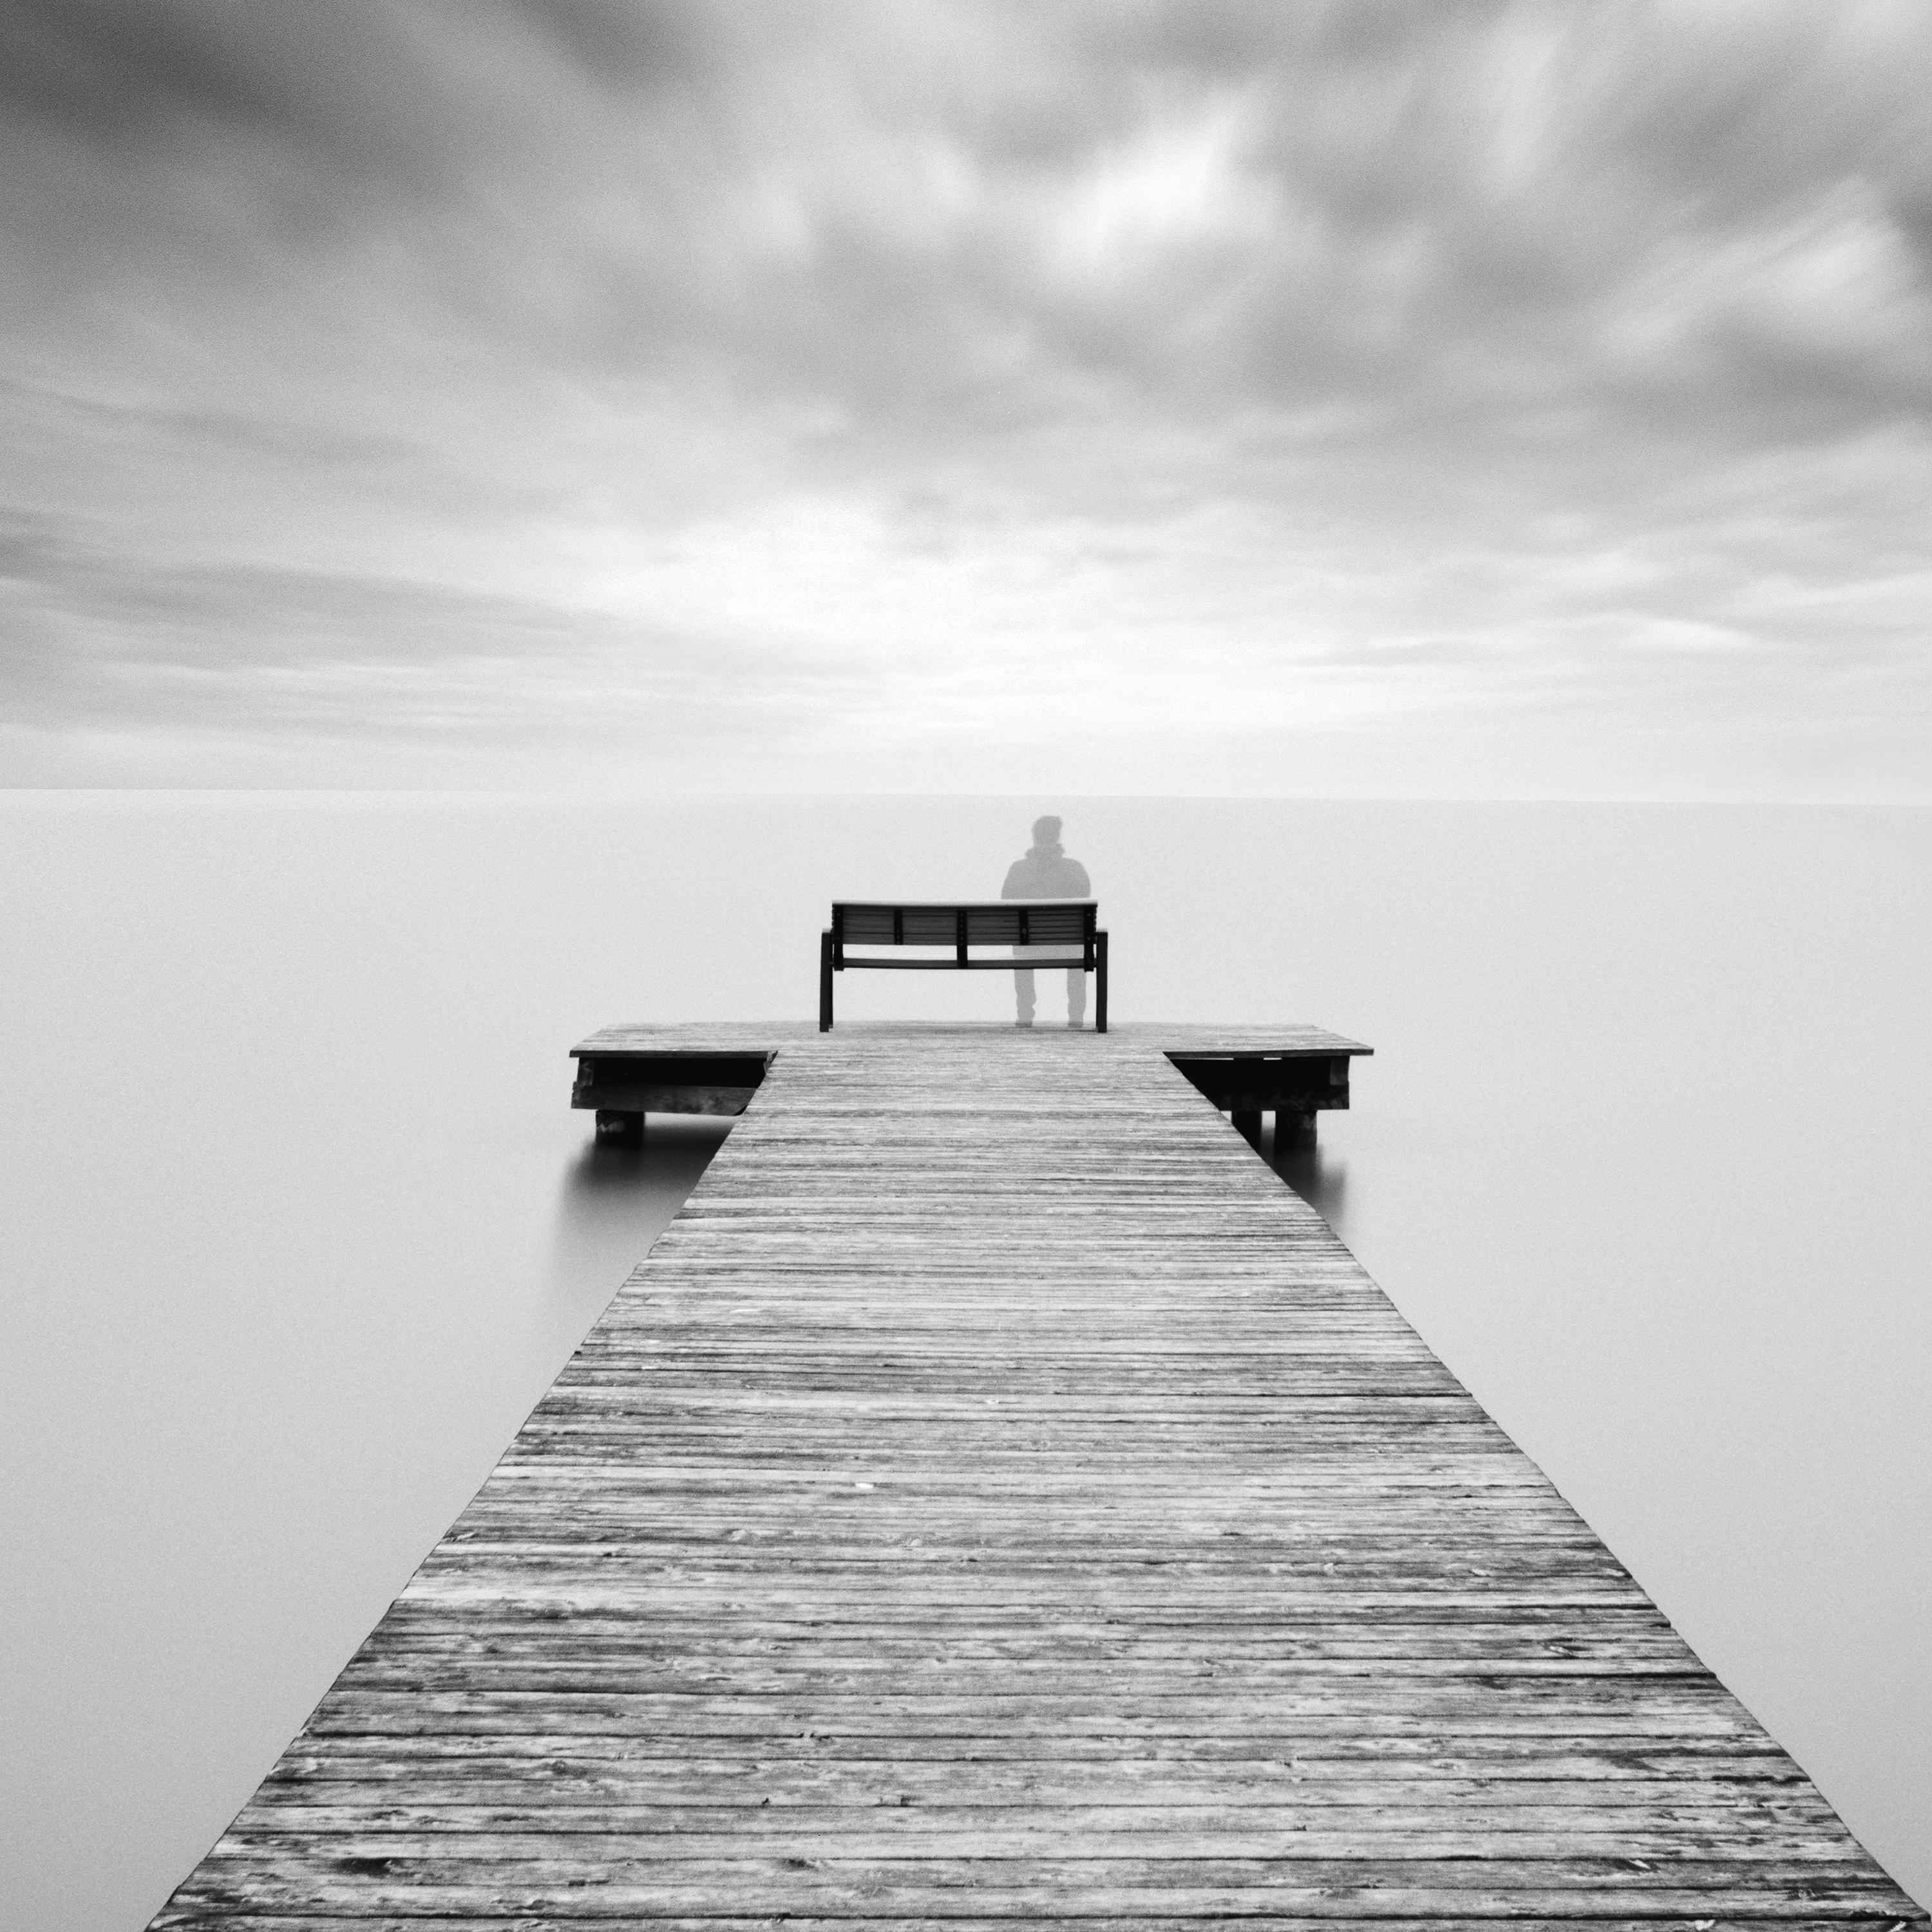 Self Portrait, lake, storm, black and white long exposure waterscape photography For Sale 3